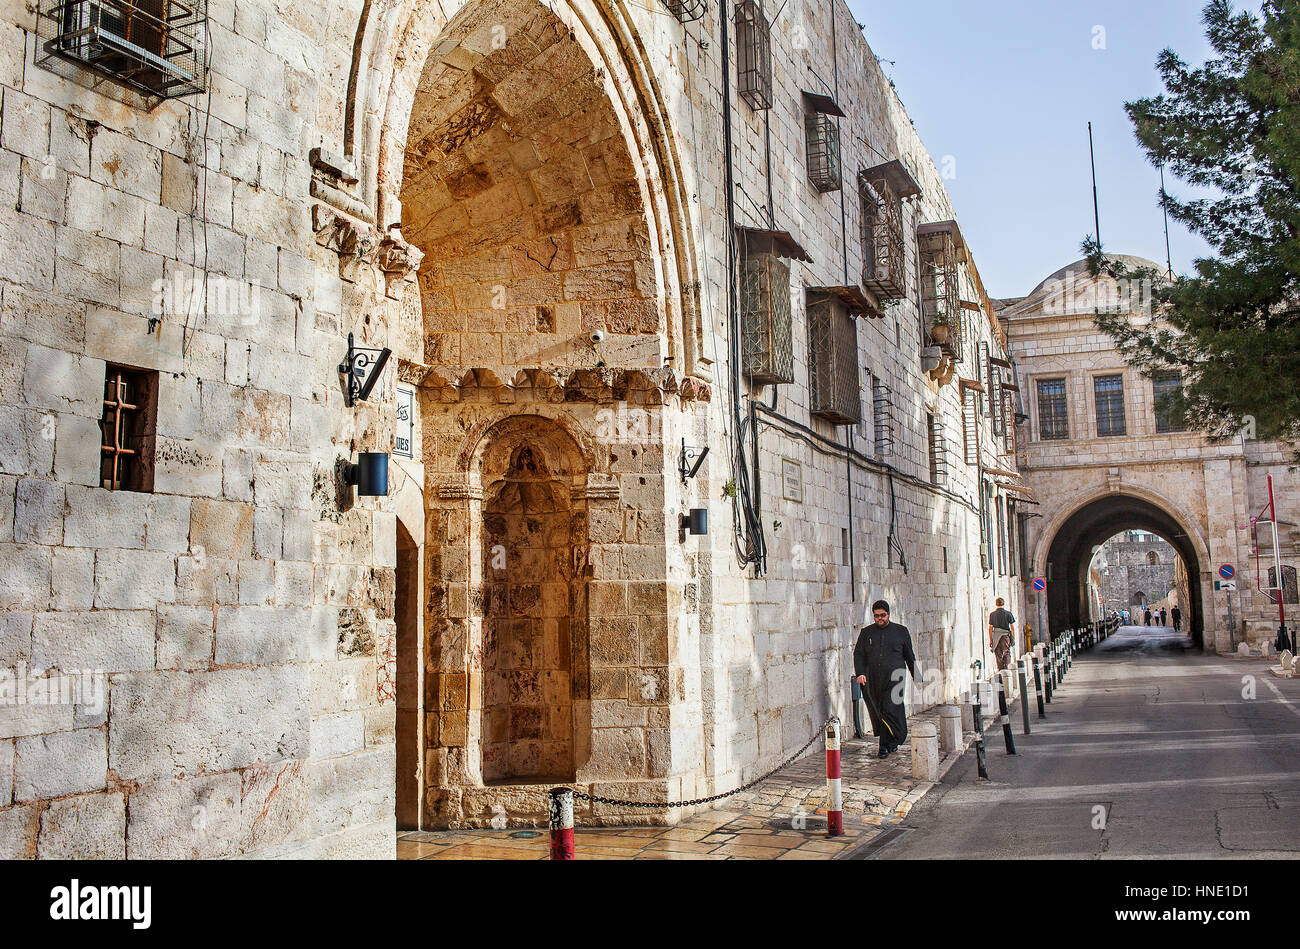 The Armenian Patriarchate street, at left the Armenian Orthodox St. James Cathedral, Armenian Quarter, Old City, Jerusalem, Israel. Stock Photo